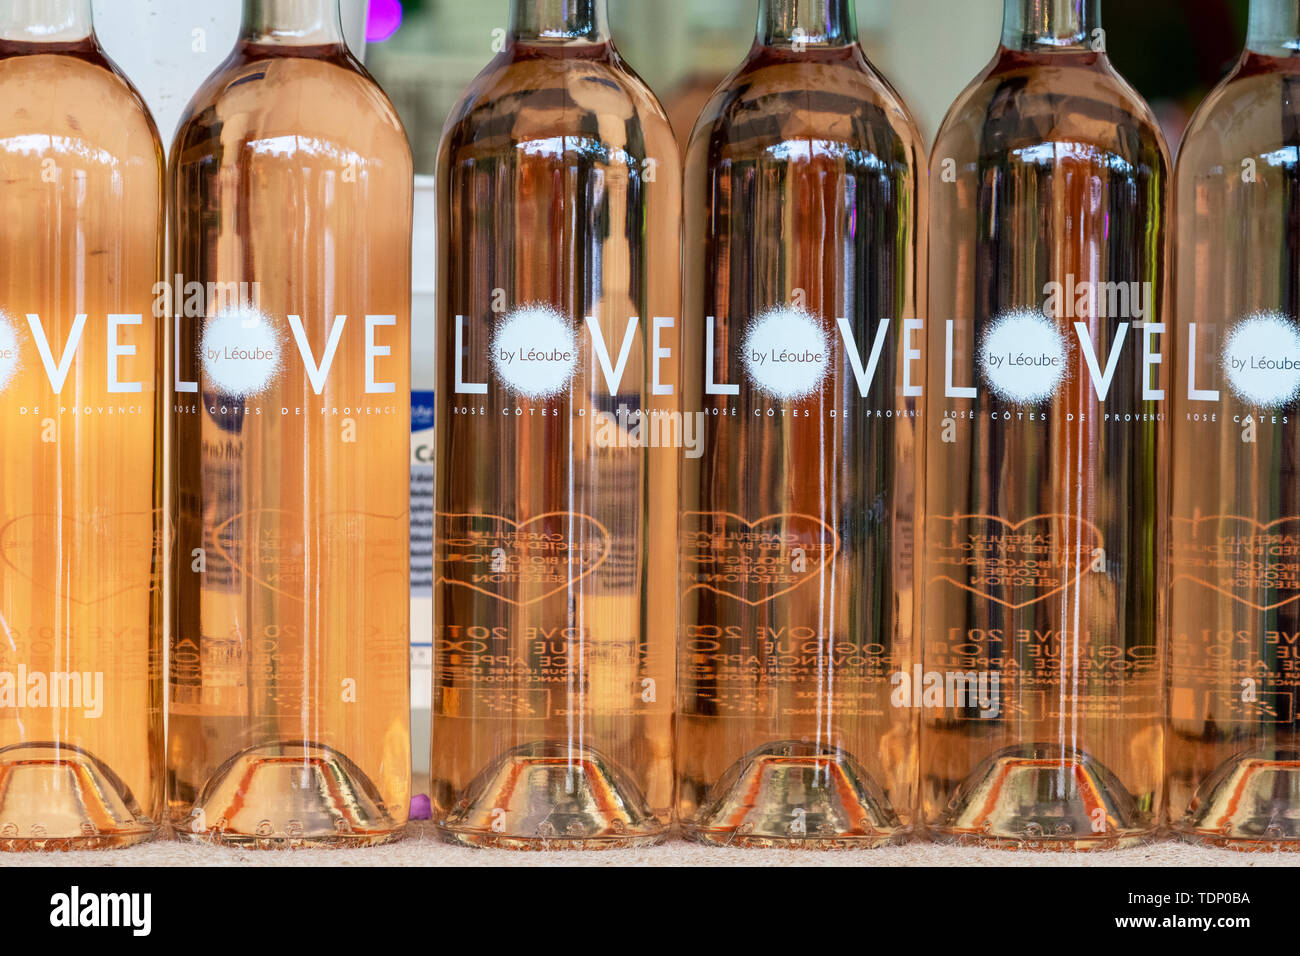 Love by Leoube Organic Provence Rose Wine bottles at Daylesford Organic farm summer festival. Daylesford, Gloucestershire, Cotswolds, UK Stock Photo